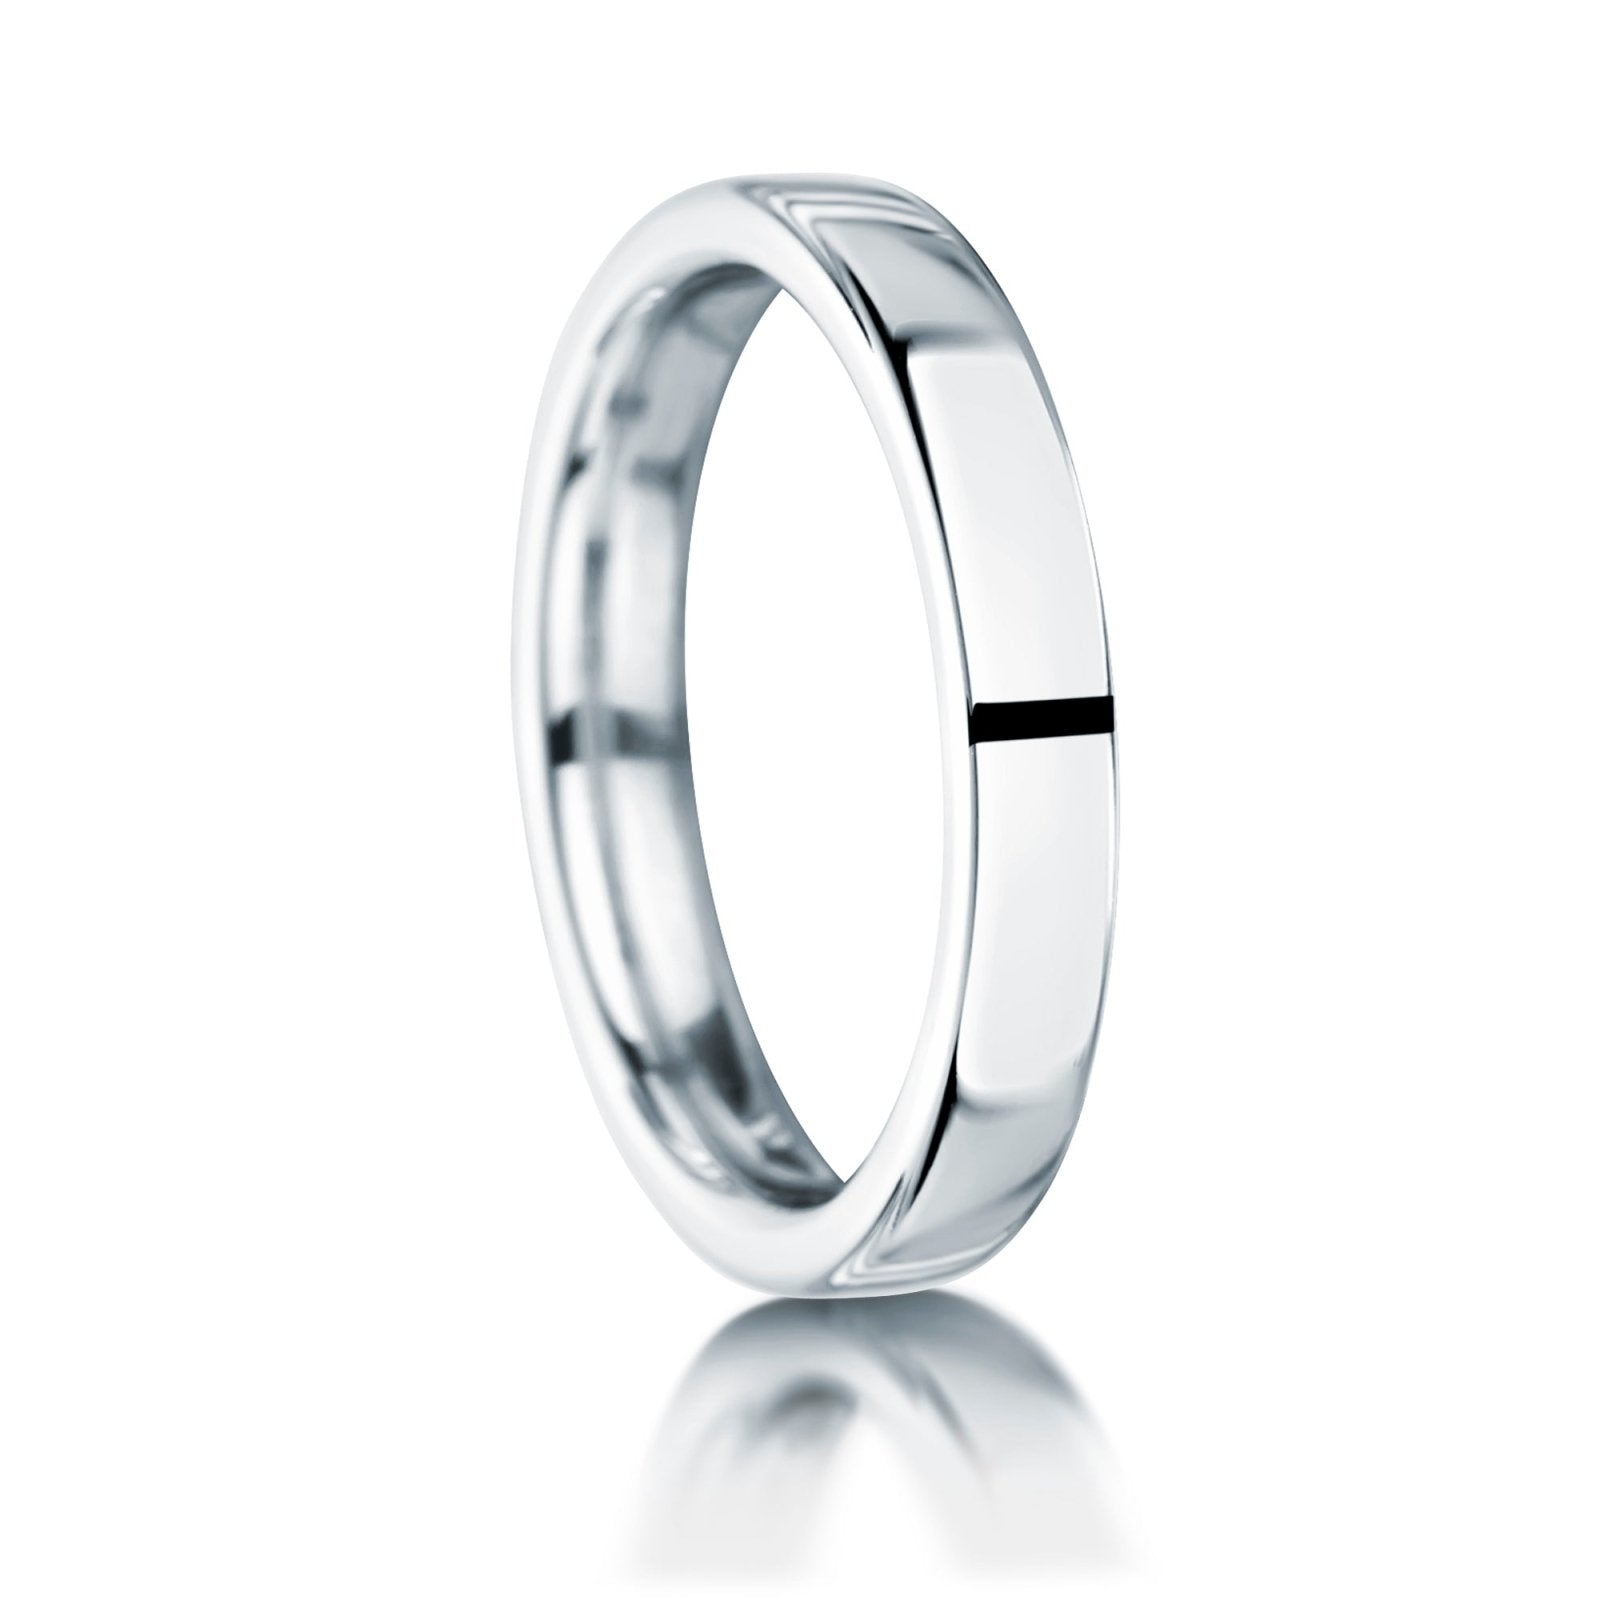 18ct White gold plain 3.0mm wide wedding ring on a white background.